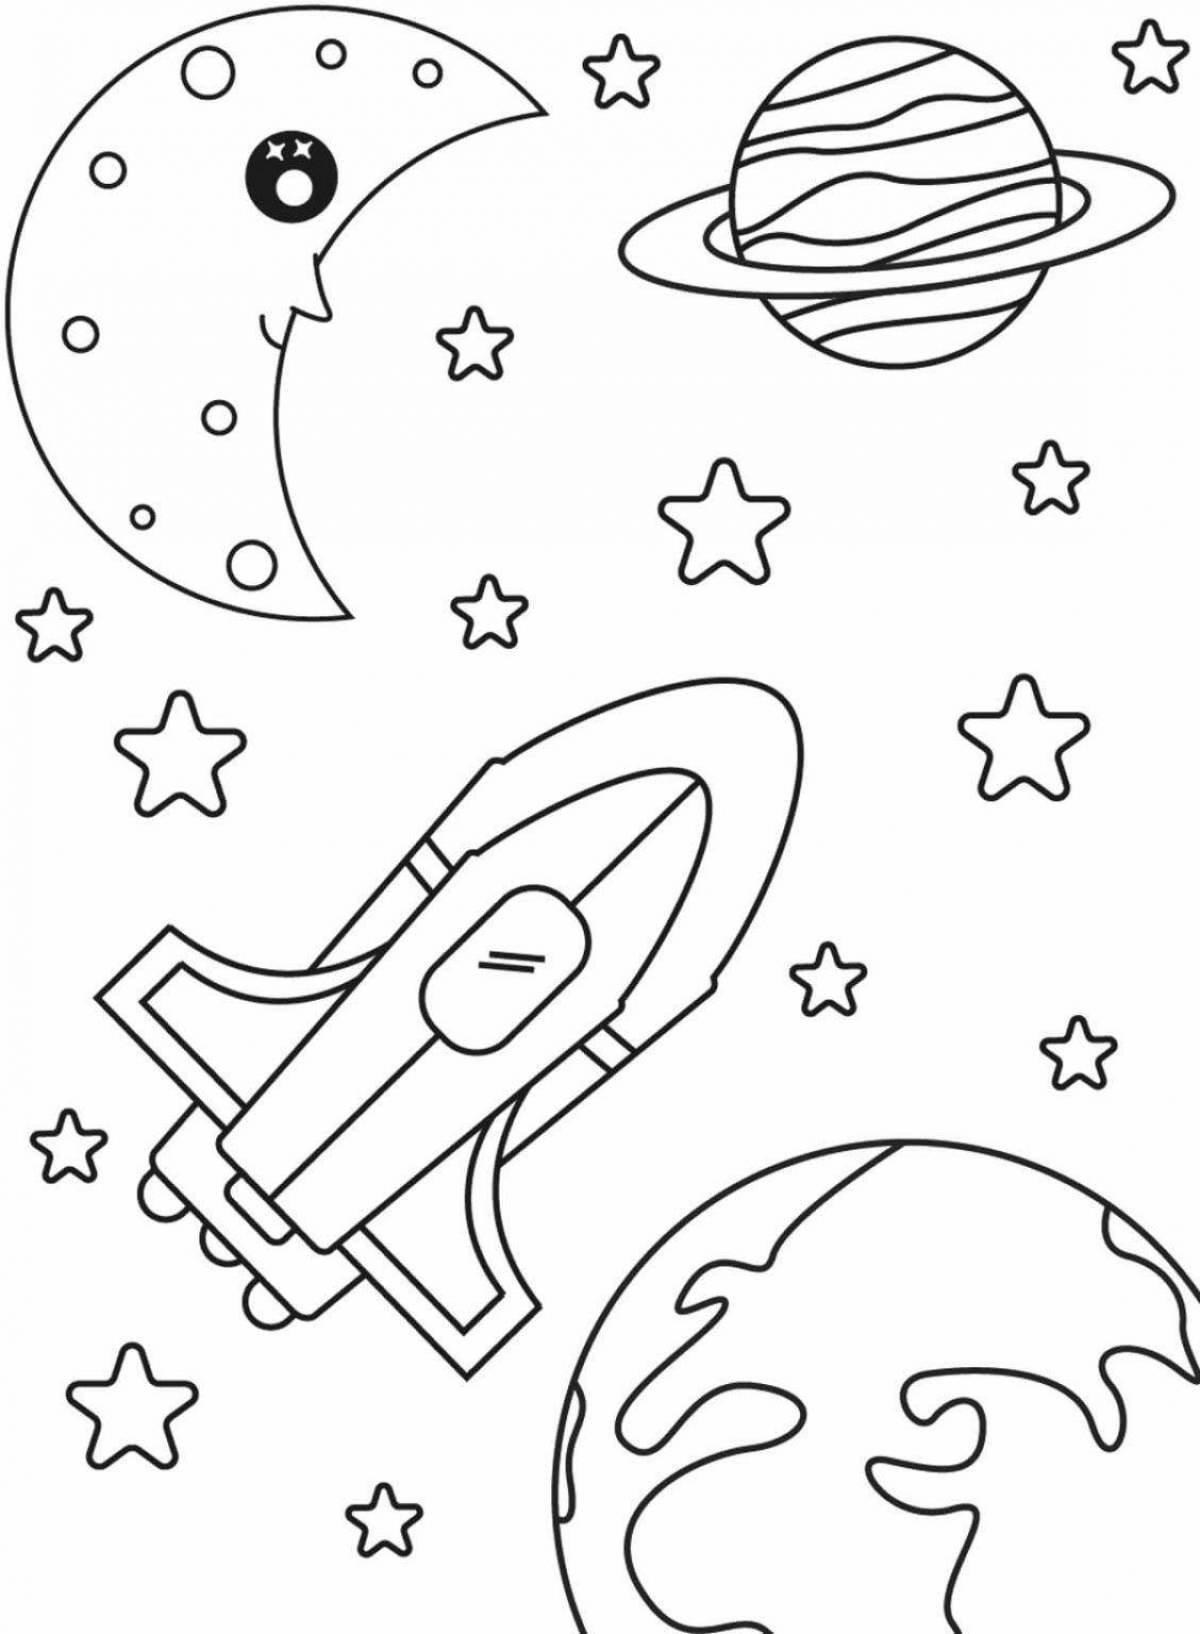 Fabulous space coloring book for 4-5 year olds